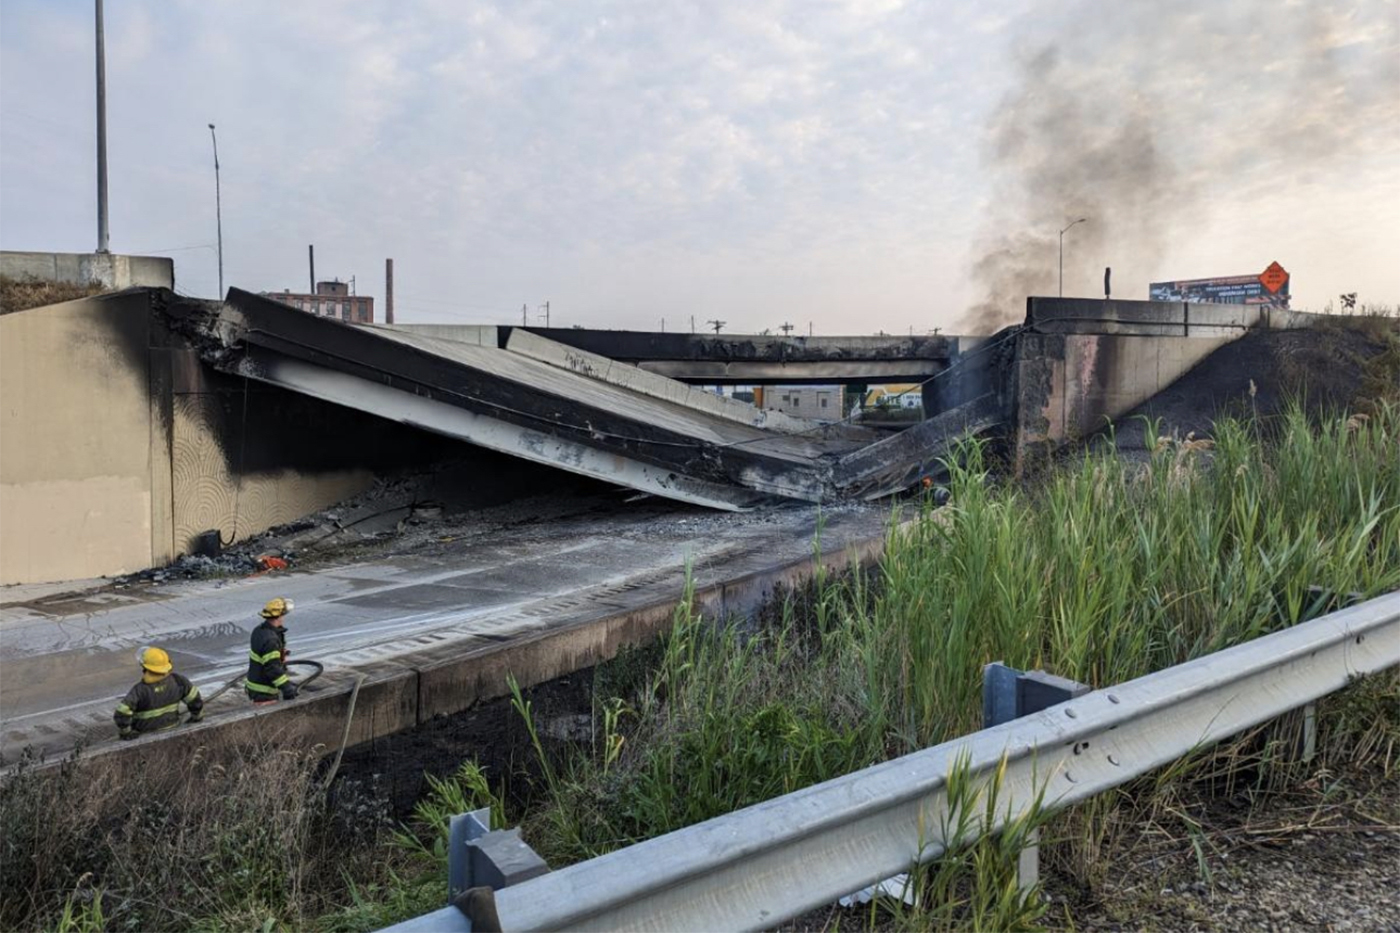 PHILADELPHIA, PA - JUNE 11: In this handout photo provided by the City of Philadelphia Office of Emergency Management, smoke rises from a collapsed section of the I-95 highway on June 11, 2023 in Philadelphia, Pennsylvania. According to reports, a tanker fire underneath the highway caused the road to collapse. (Photo by City of Philadelphia via Getty Images)